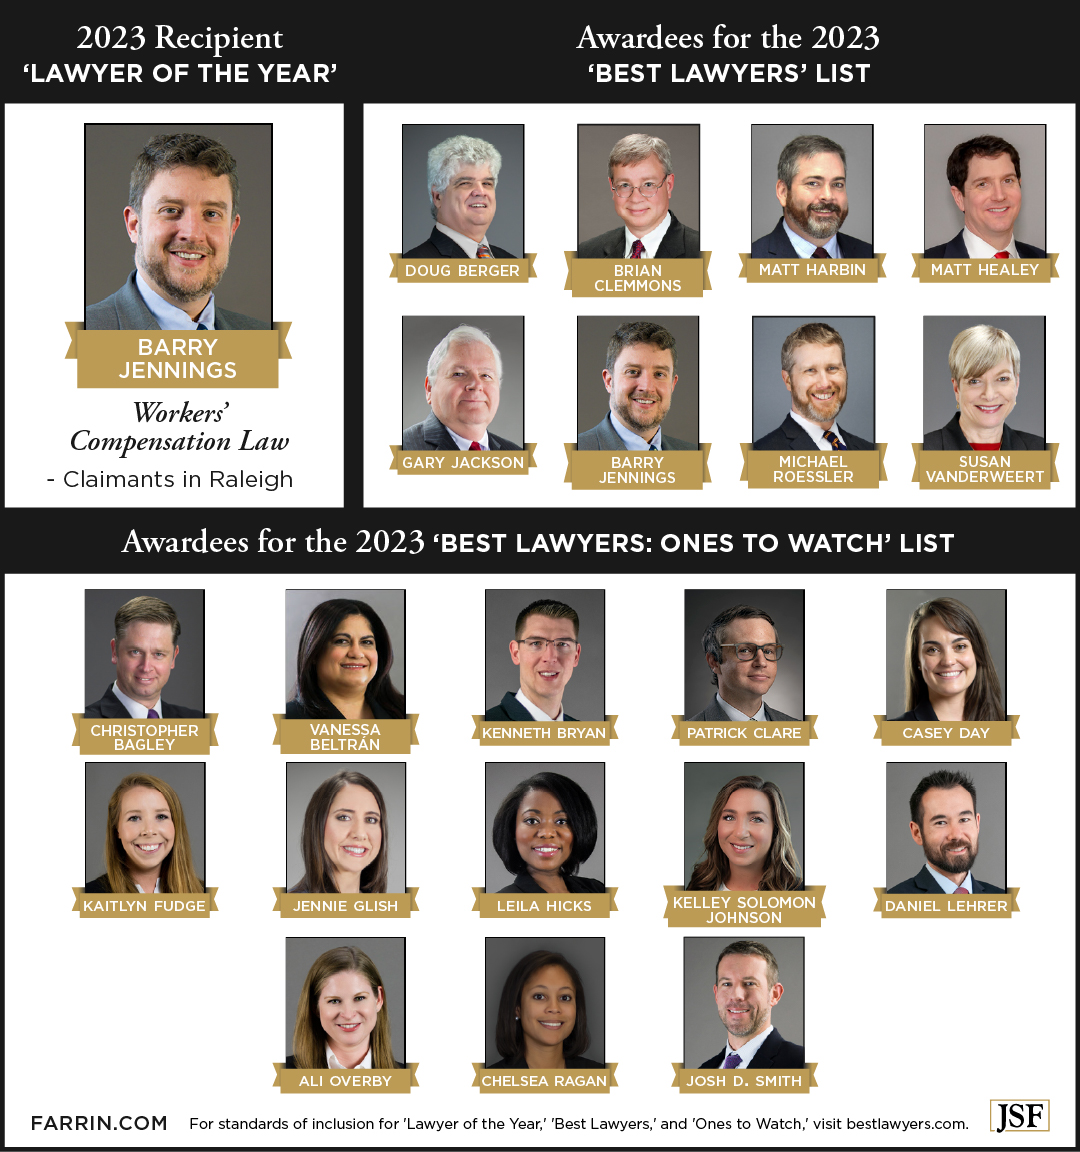 Attorneys who were named to U.S. News Best Lawyers and Lawyer of the Year 2023 list